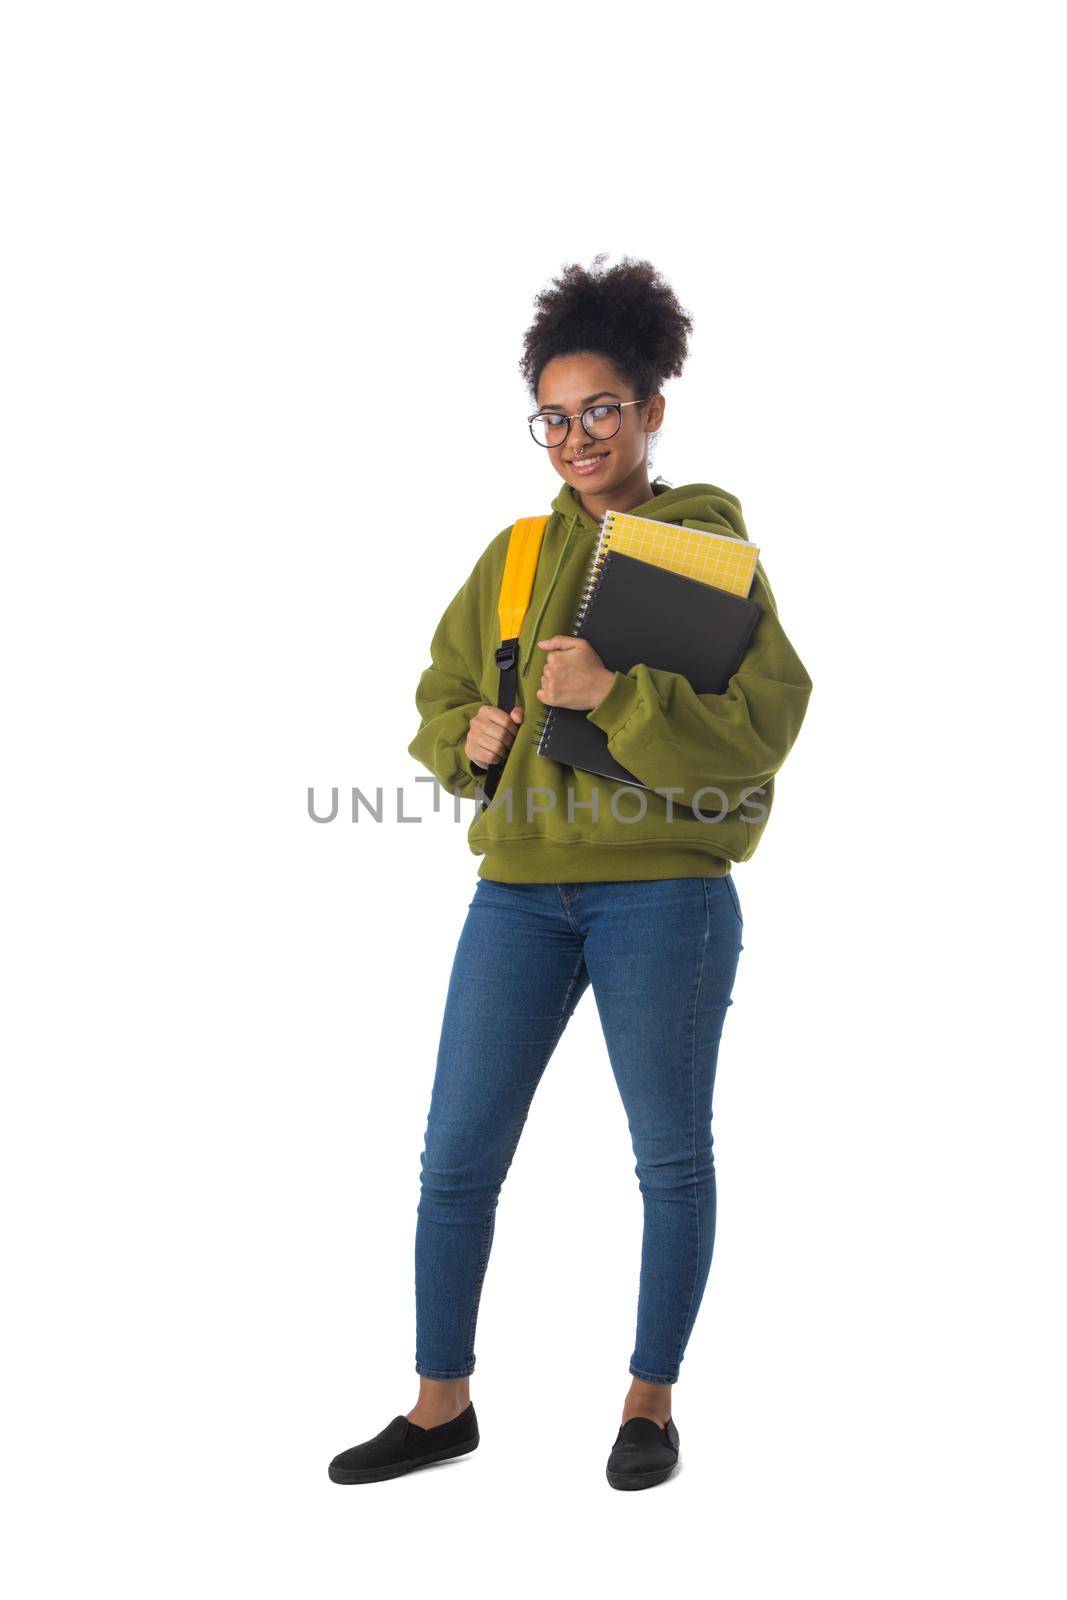 Friendly ethnic black female high school student in eyeglasses with backpack and composition book isolated on white background, full length portrait